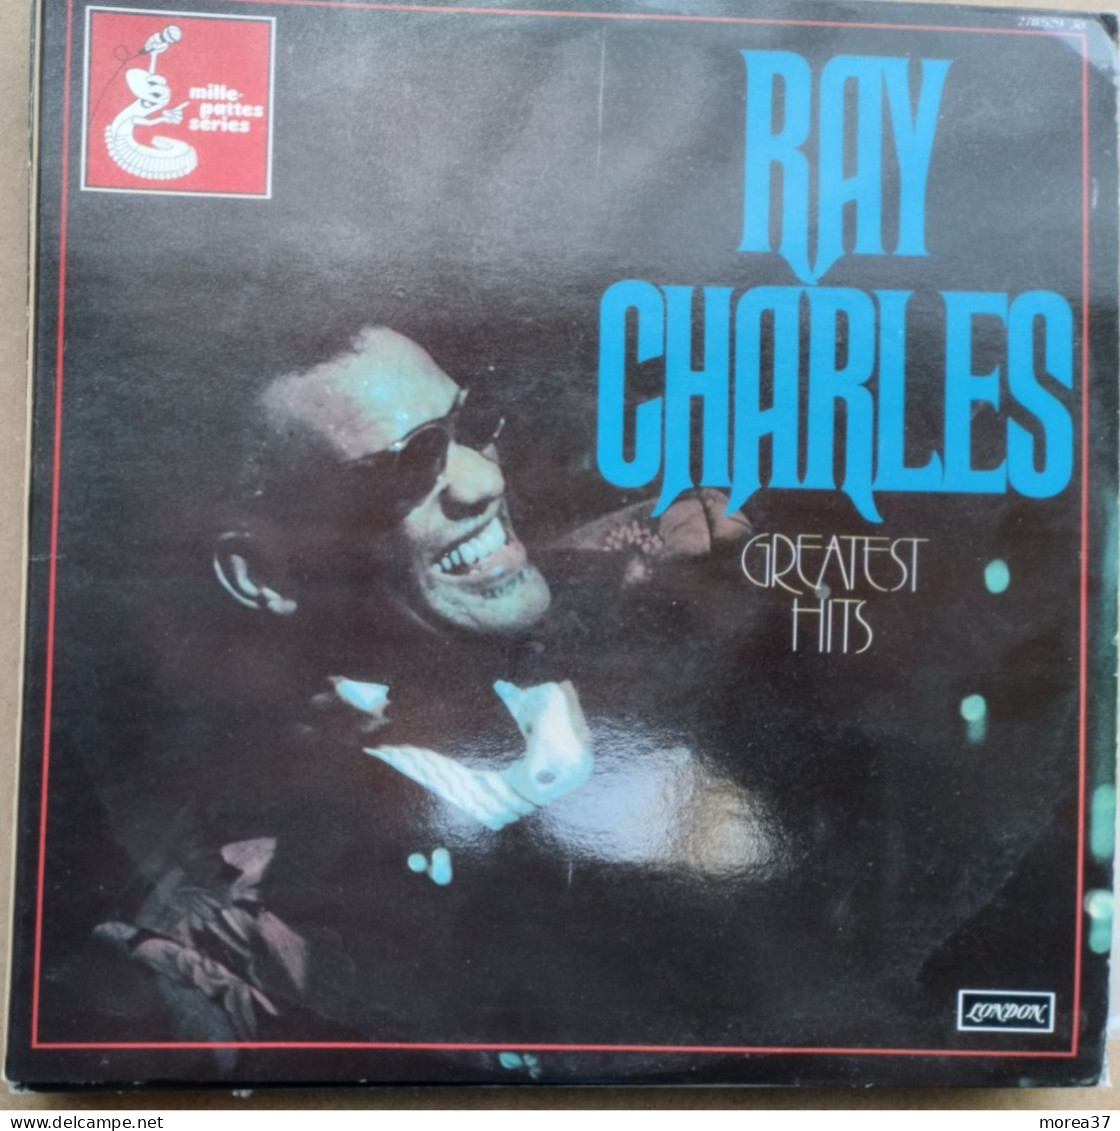 RAY CHARLES Greatest Hits   2 LP   LONDON 278529 30 (CM3) - Other - English Music